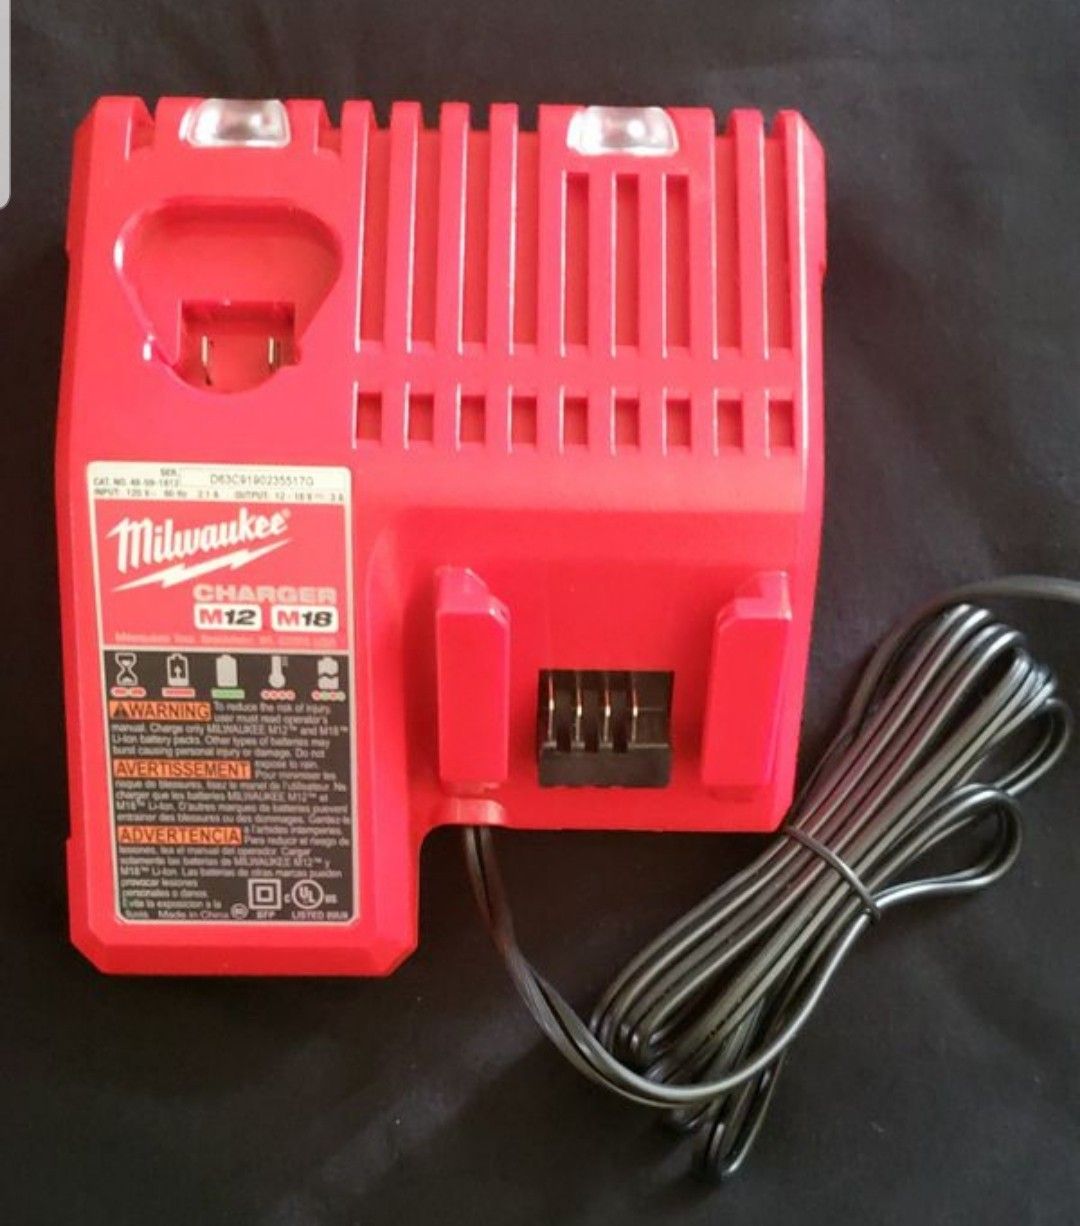 Brand New Milwaukee M12 & M18 Multi-Voltage Battery Charger-$23